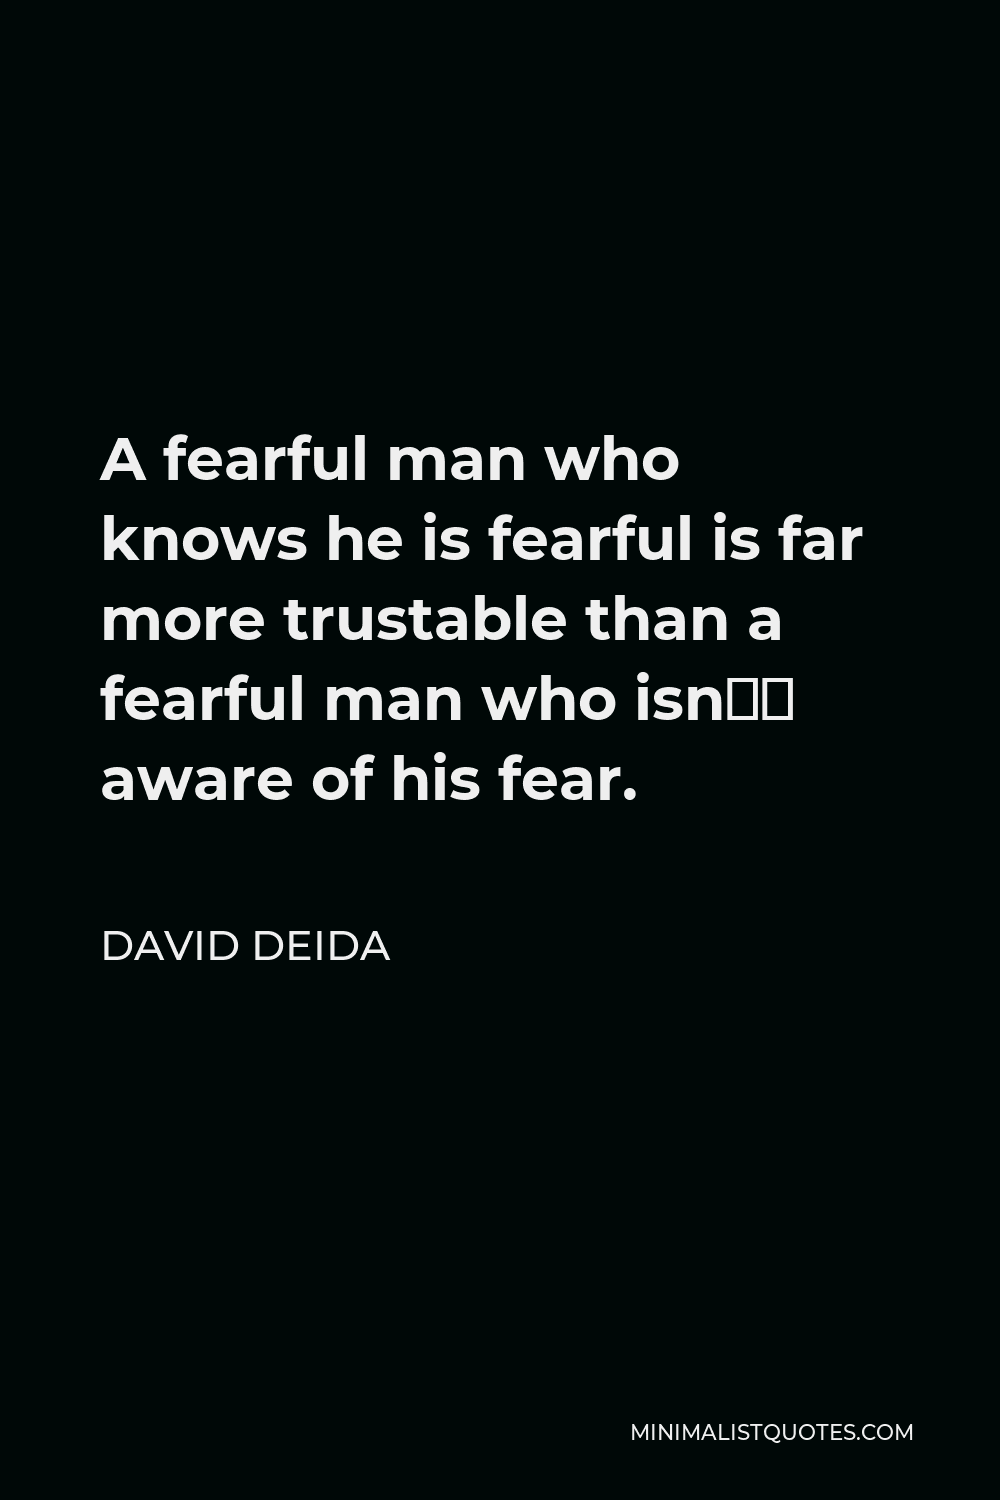 David Deida Quote - A fearful man who knows he is fearful is far more trustable than a fearful man who isn’t aware of his fear.